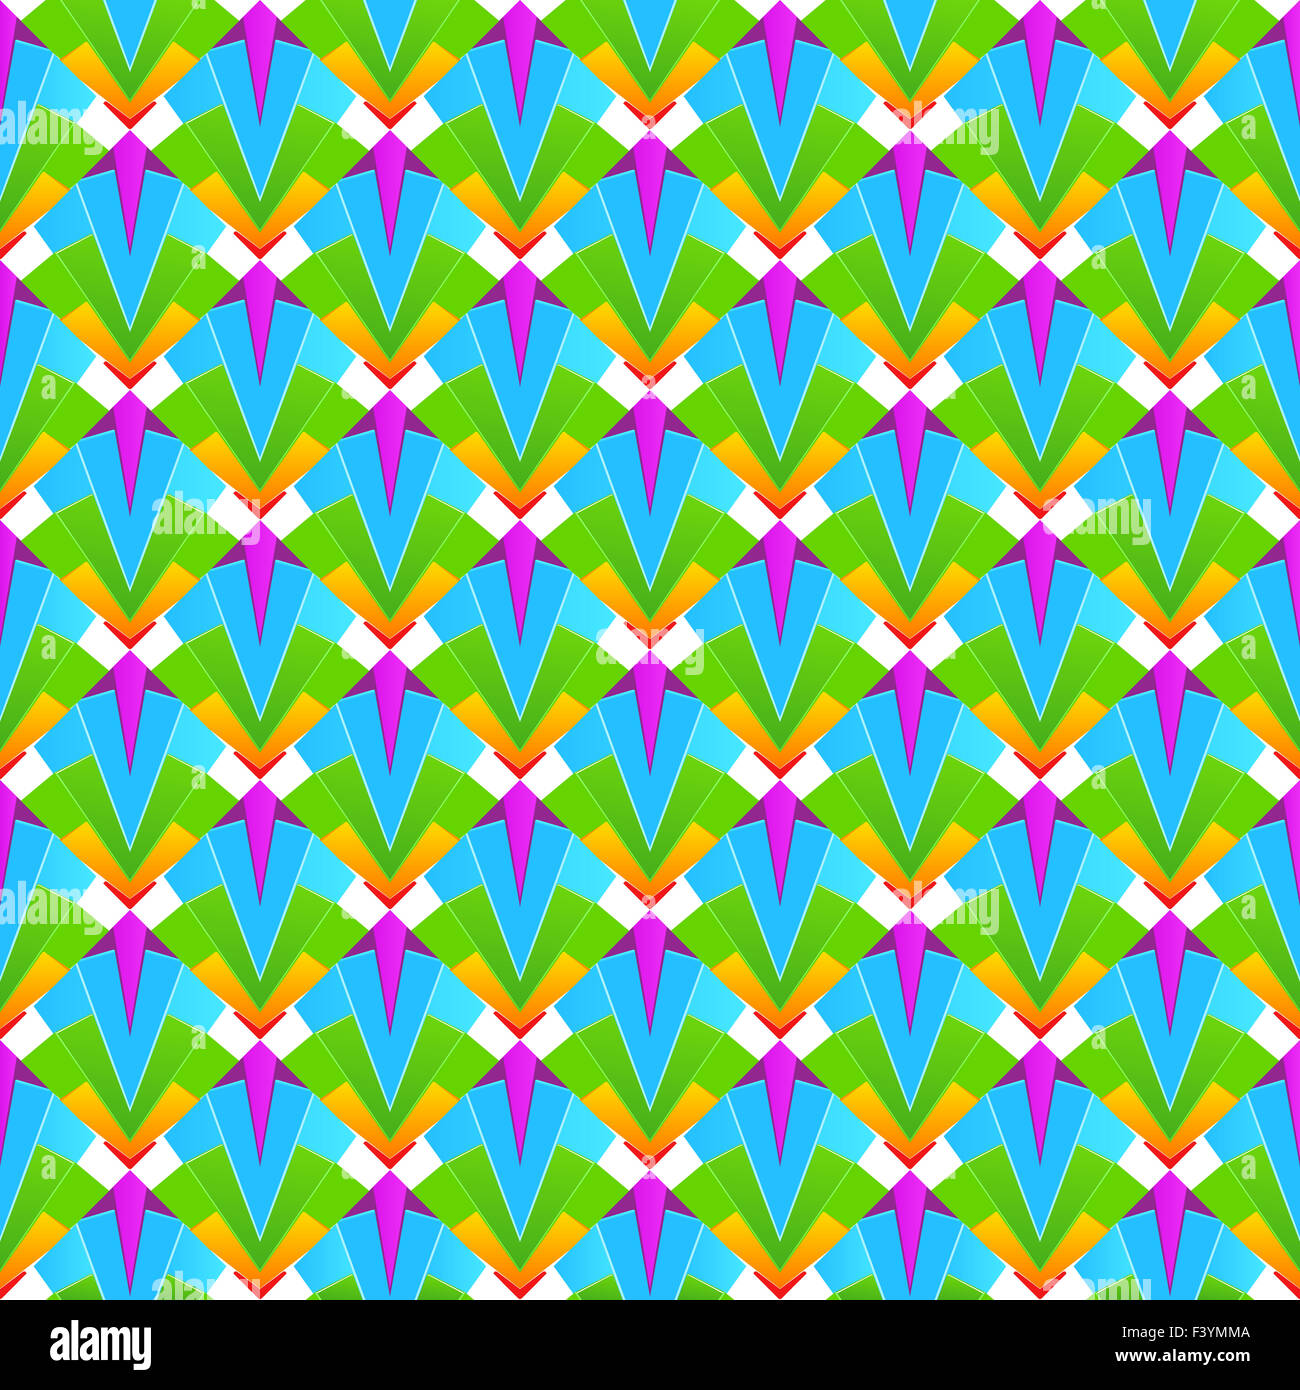 seamless tileable background pattern Stock Photo